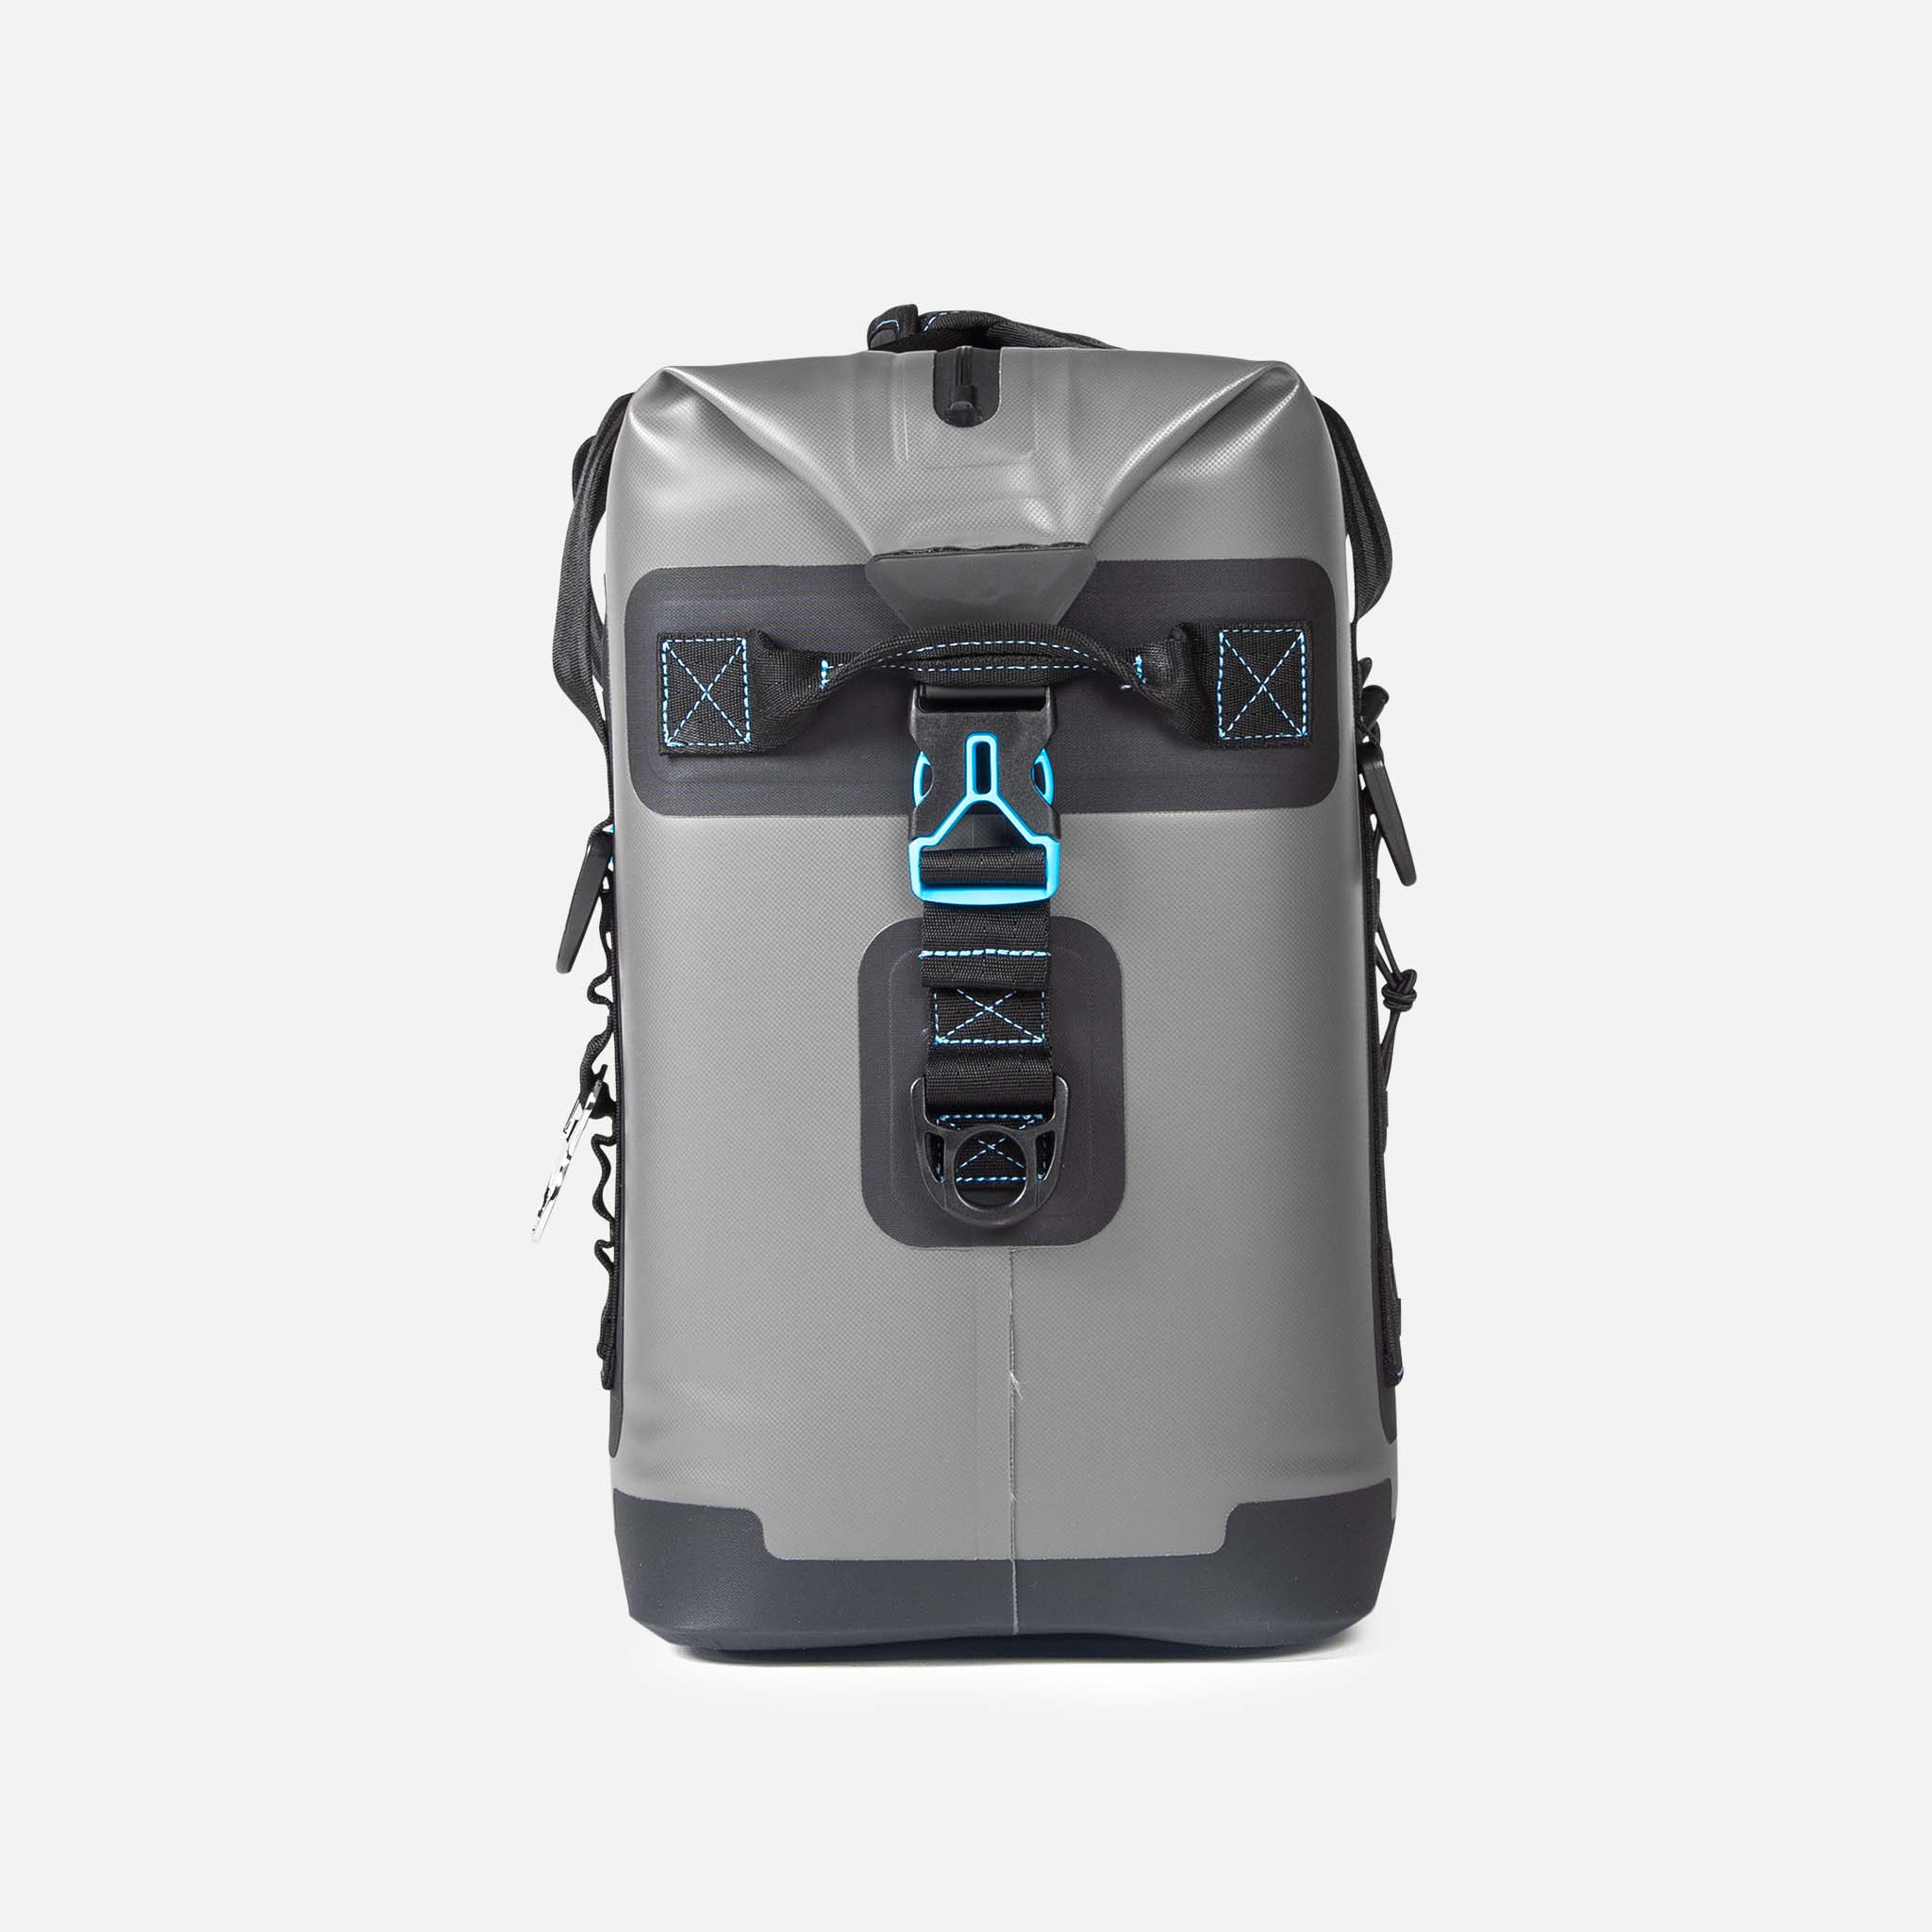 Nomad 20 - Canyon Coolers